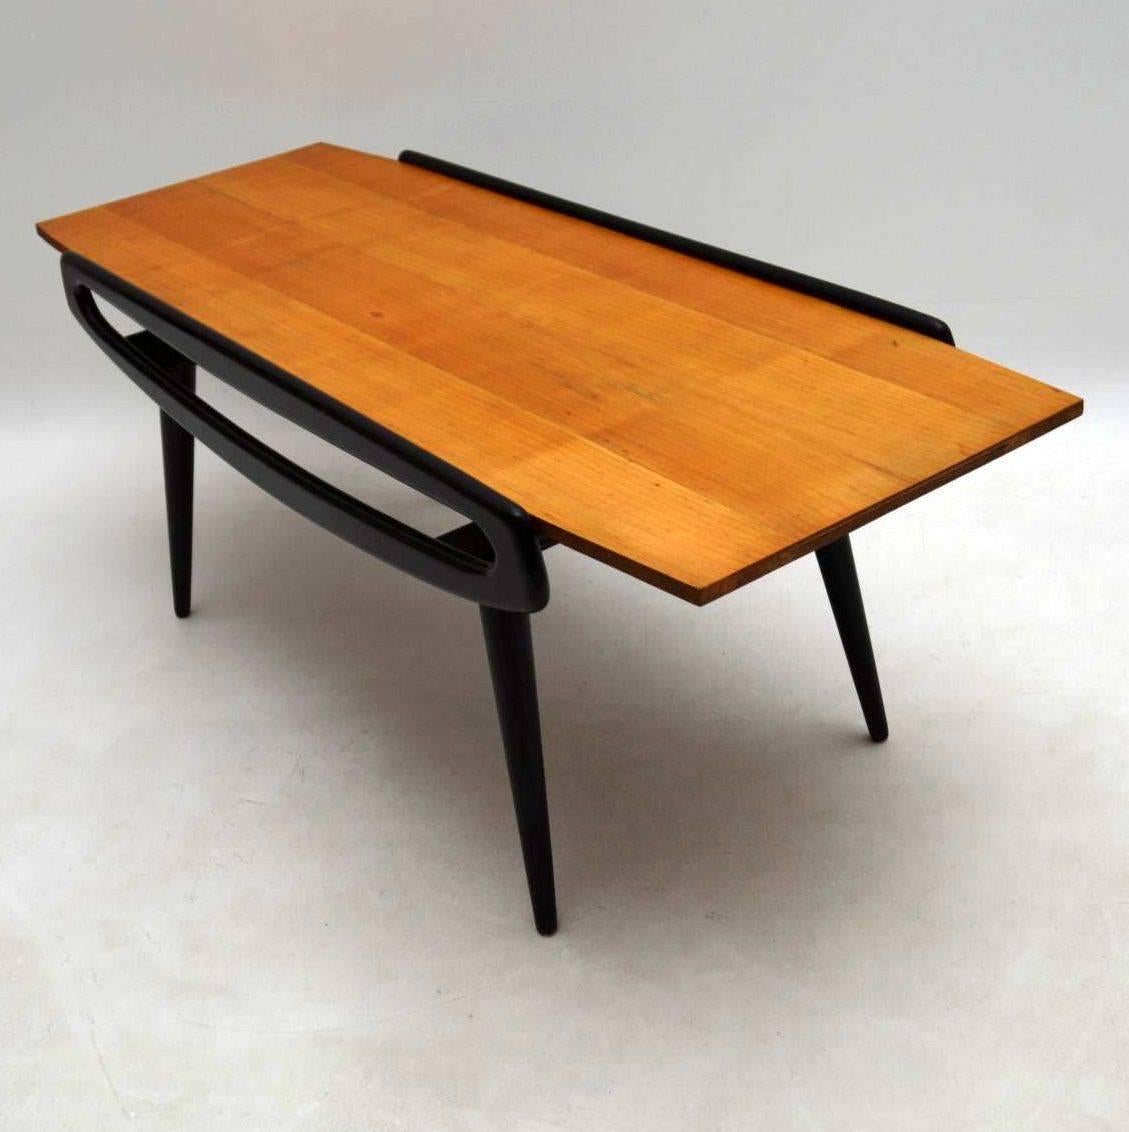 English Vintage 1950s, Italian Coffee Table in Sycamore and Ebonized Wood